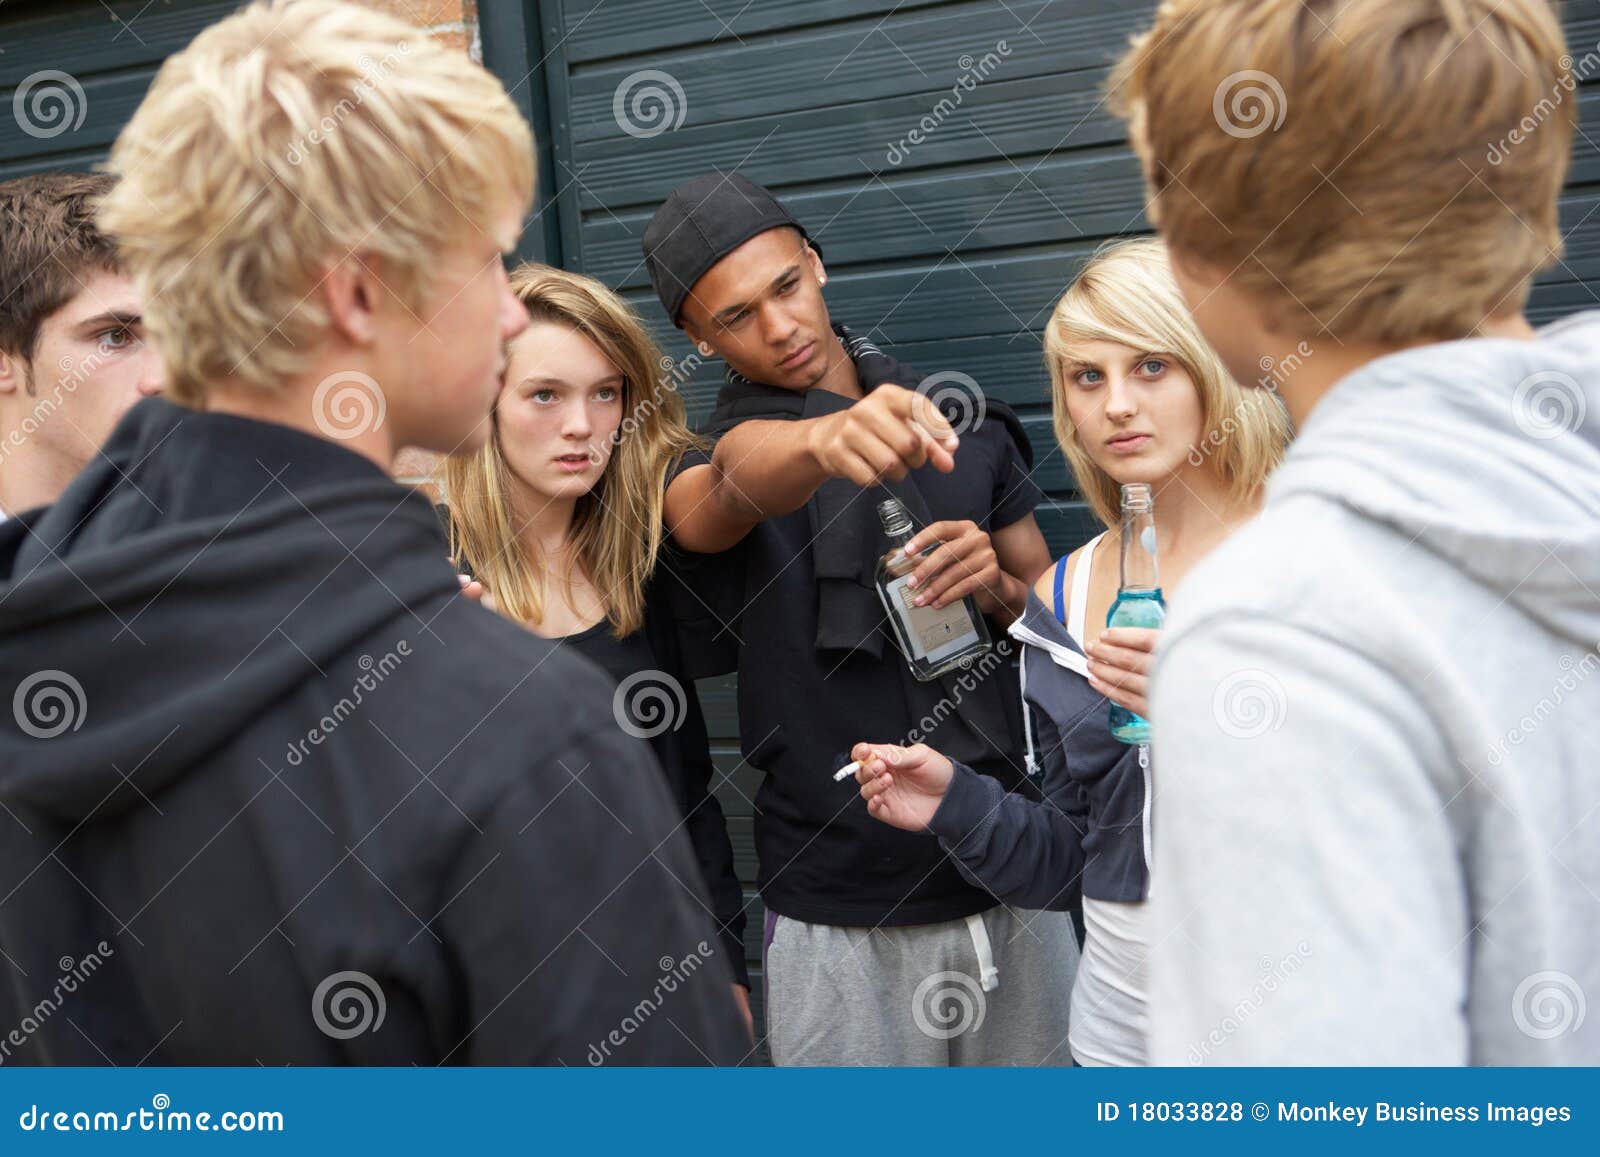 group of threatening teenagers hanging out